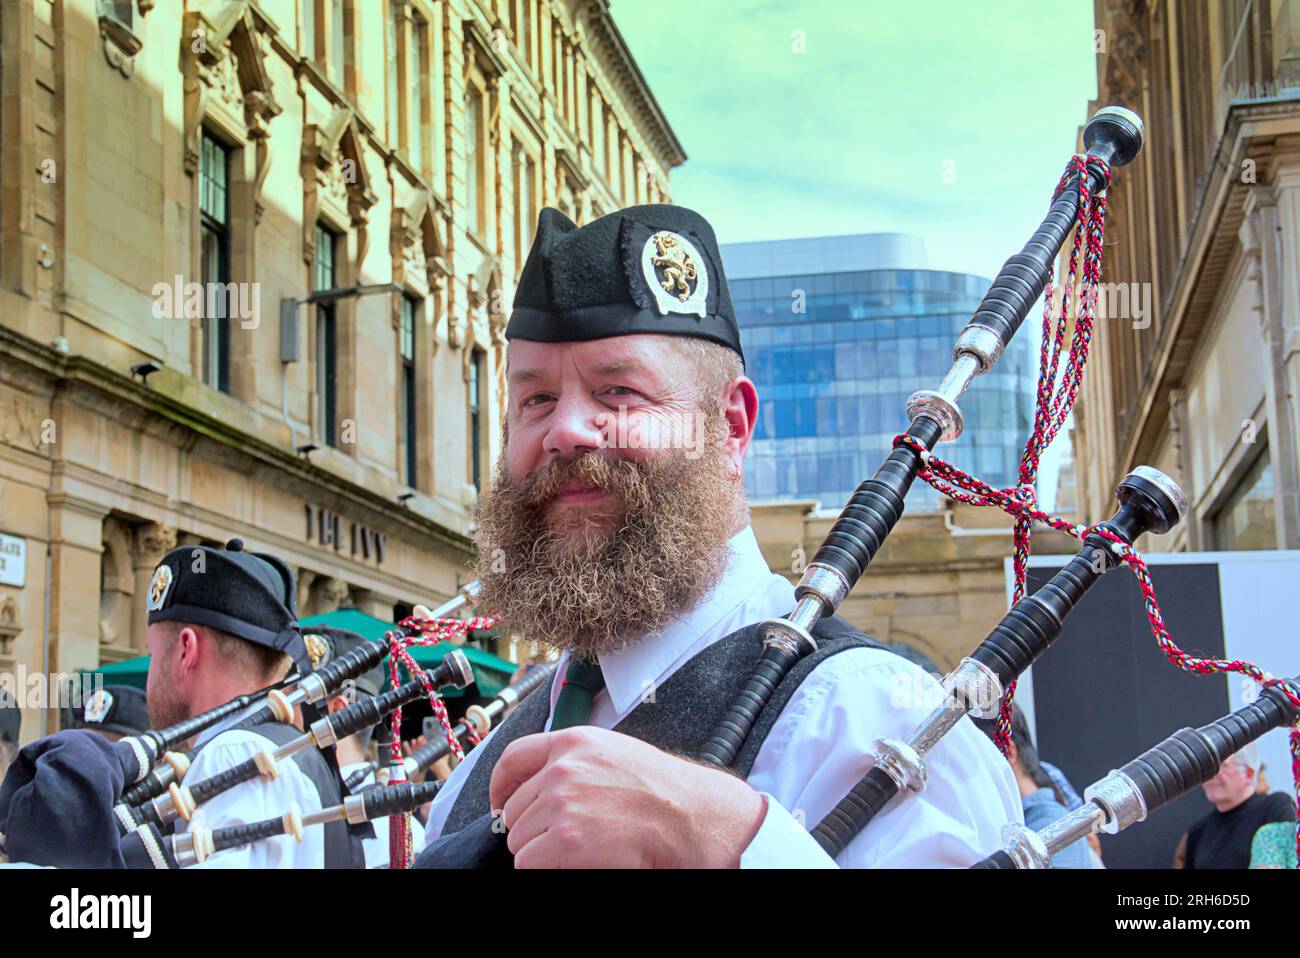 Glasgow, Scotland, UK. 14th  August, 2023.   Piping live hit the city as hundreds of pipe bad musicians swarmed the city centre with the Auckland pipe band from new zealand performing to crowds on buchanan street on the citys style mile.  Credit Gerard Ferry/Alamy Live News Stock Photo